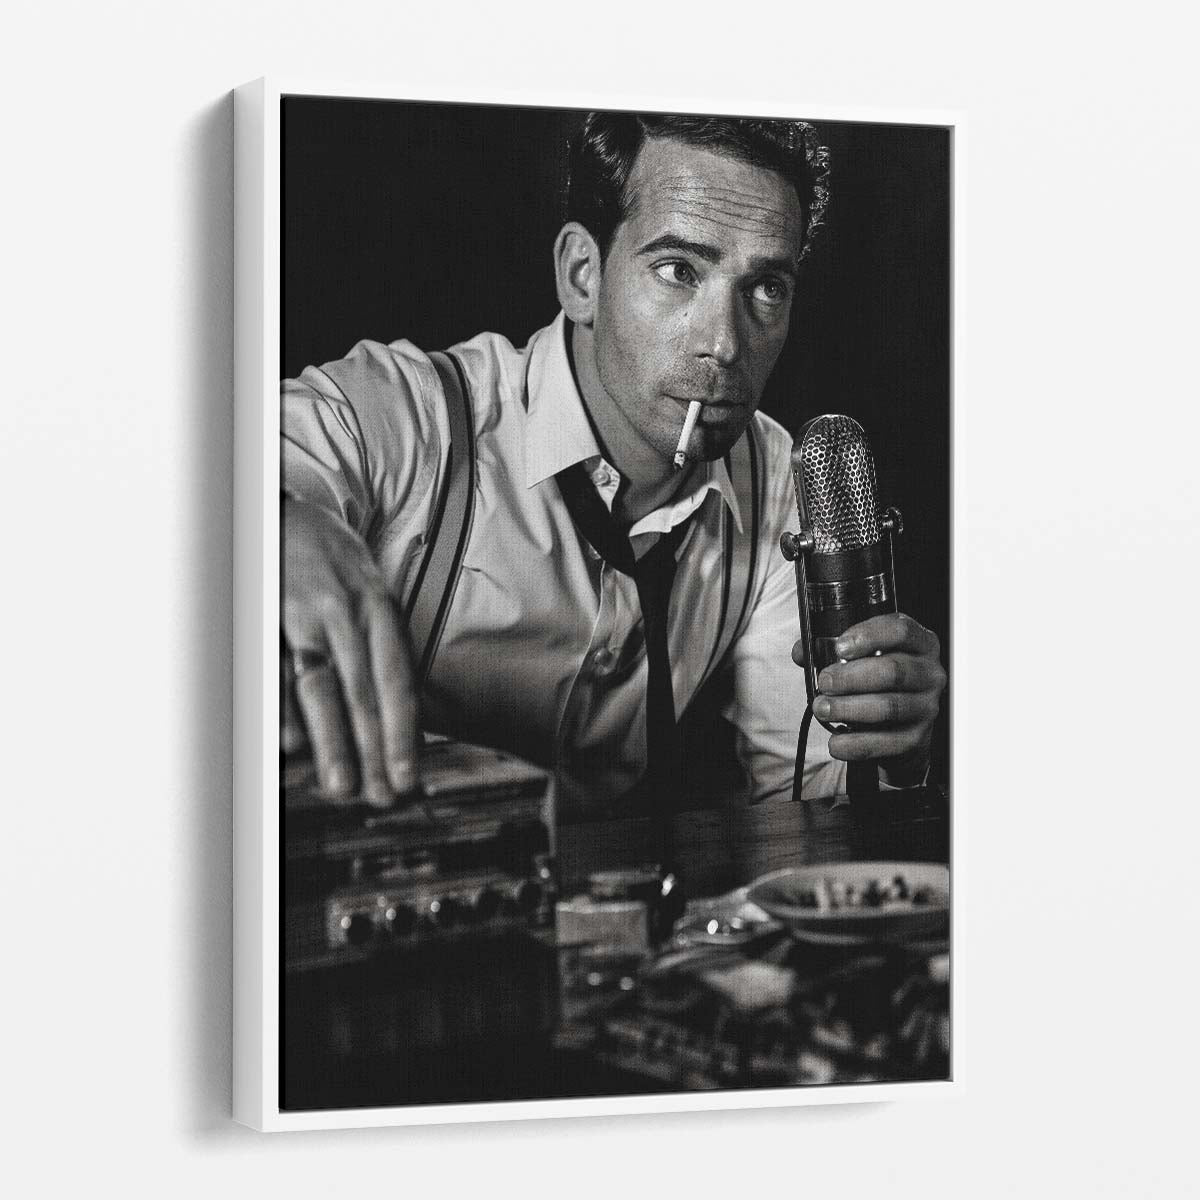 Vintage Portrait Photography of Smoking Man with Retro Microphone by Luxuriance Designs, made in USA